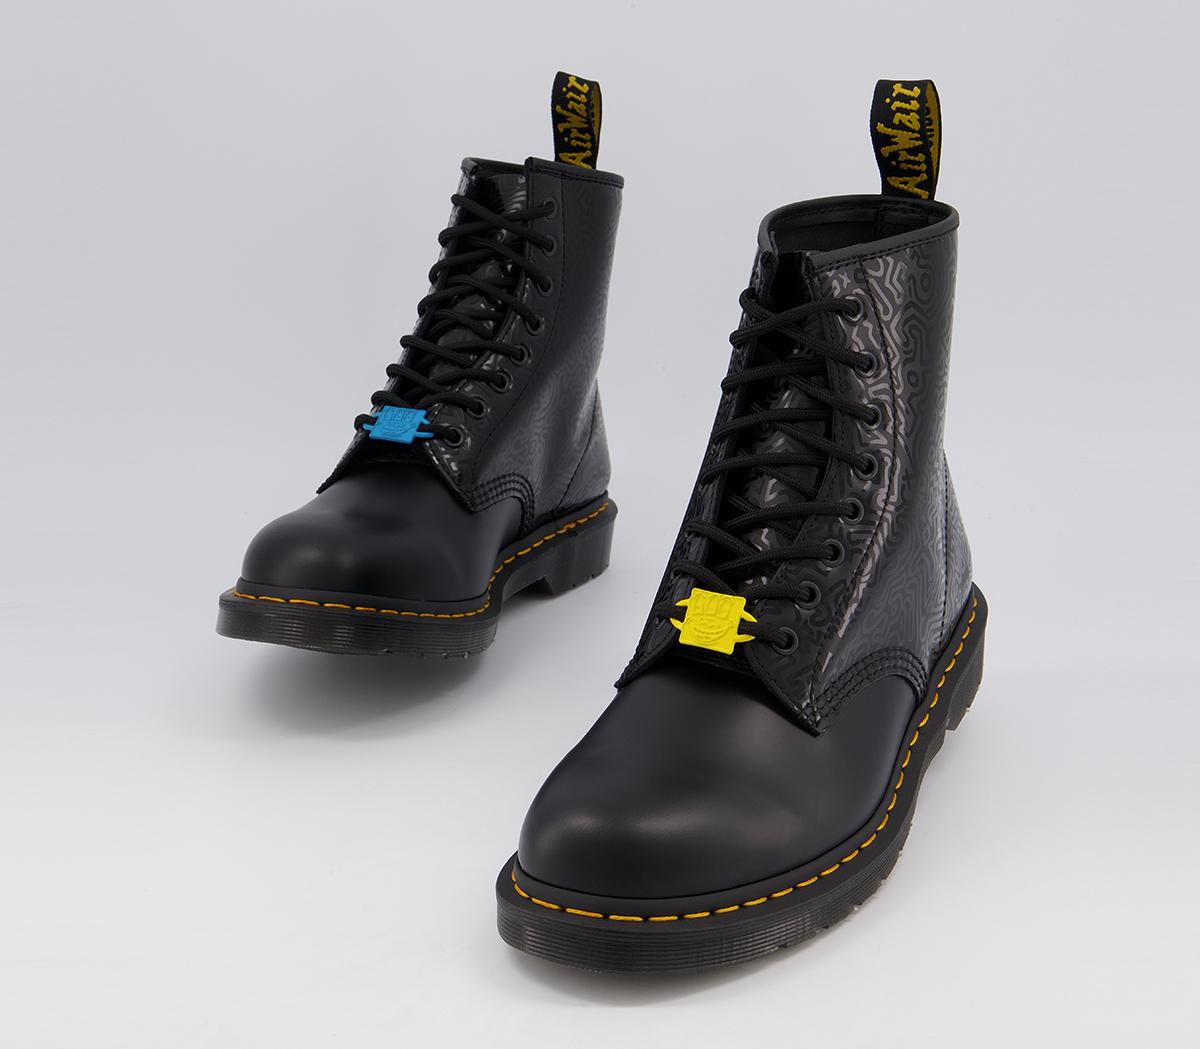 Dr. Martens Keith Haring 8 Eye Boots W Black - Womens